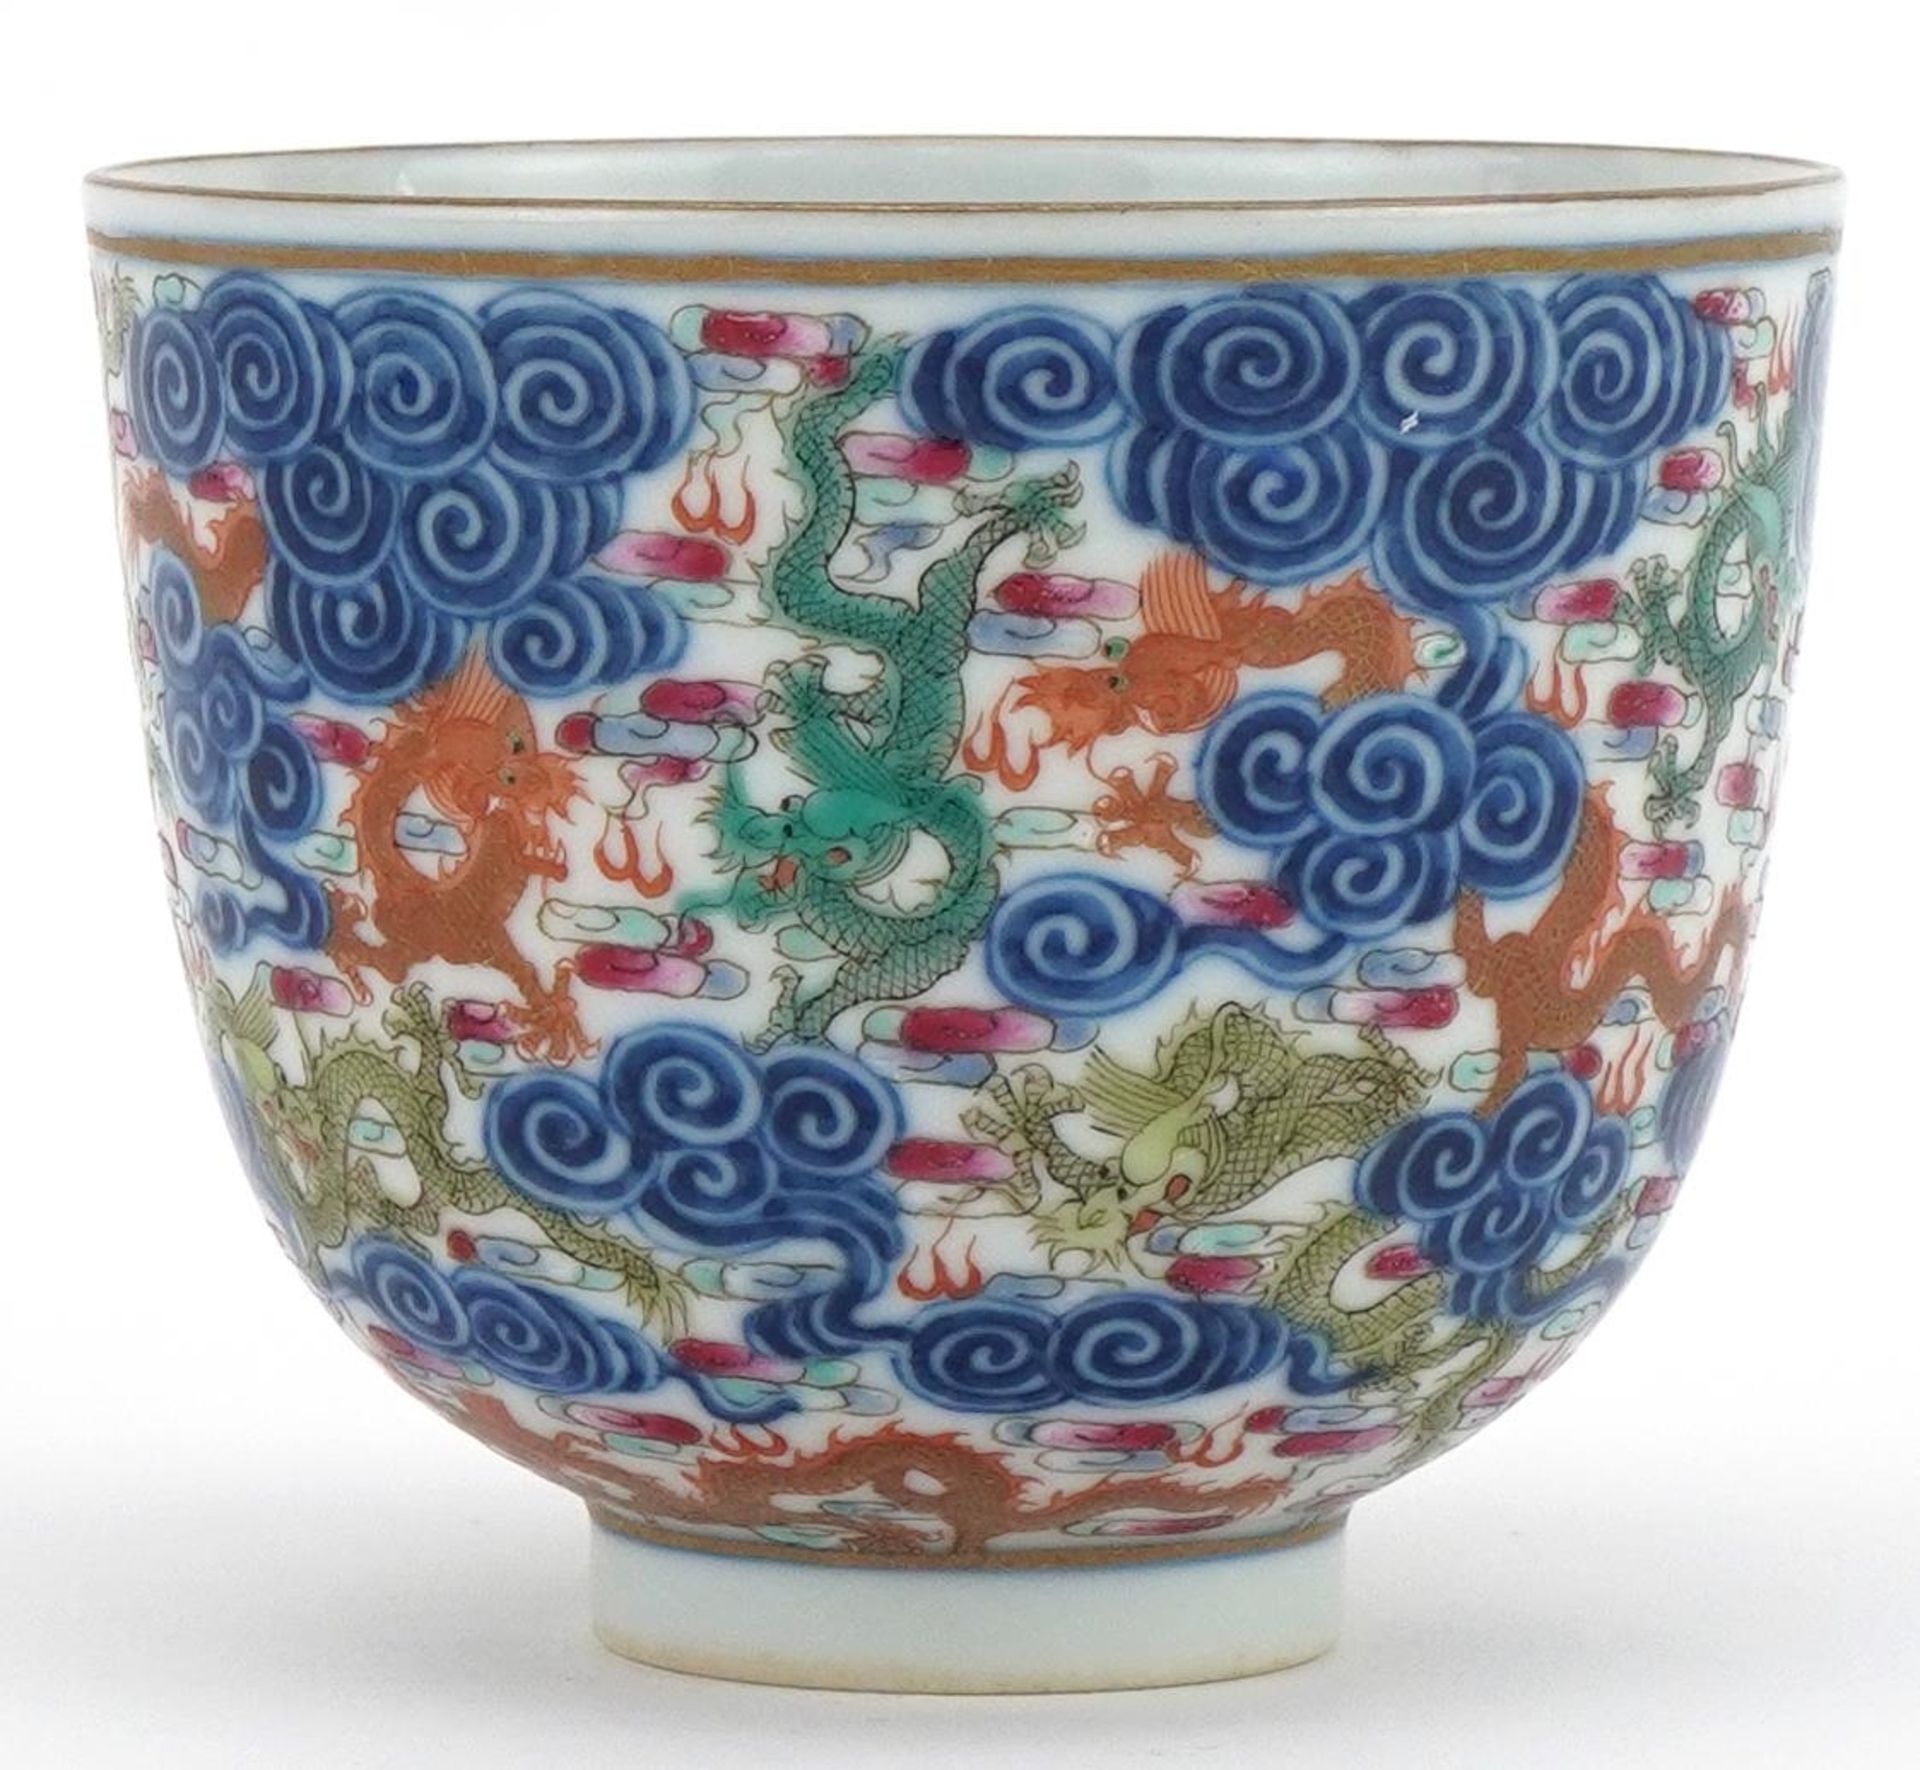 Chinese doucai porcelain tea bowl hand painted with dragons amongst clouds, six figure character - Image 3 of 7